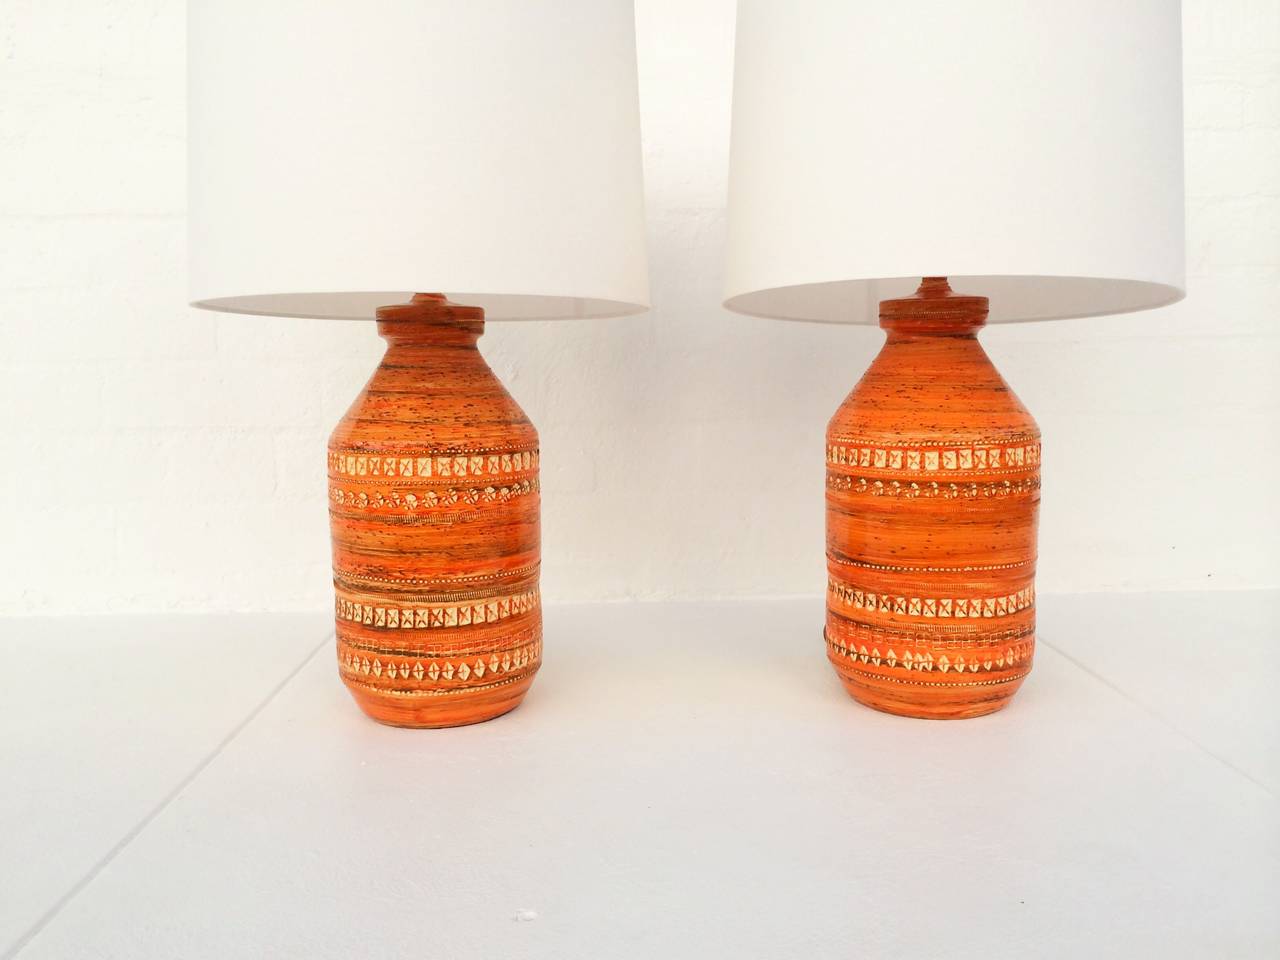 Beautiful pair of orange Italian ceramic lamps by Aldo Londi for Bitossi.

New linen shades. Rewired with new brass sockets and brown cloth cord.
The diameter of the base without shade is 9